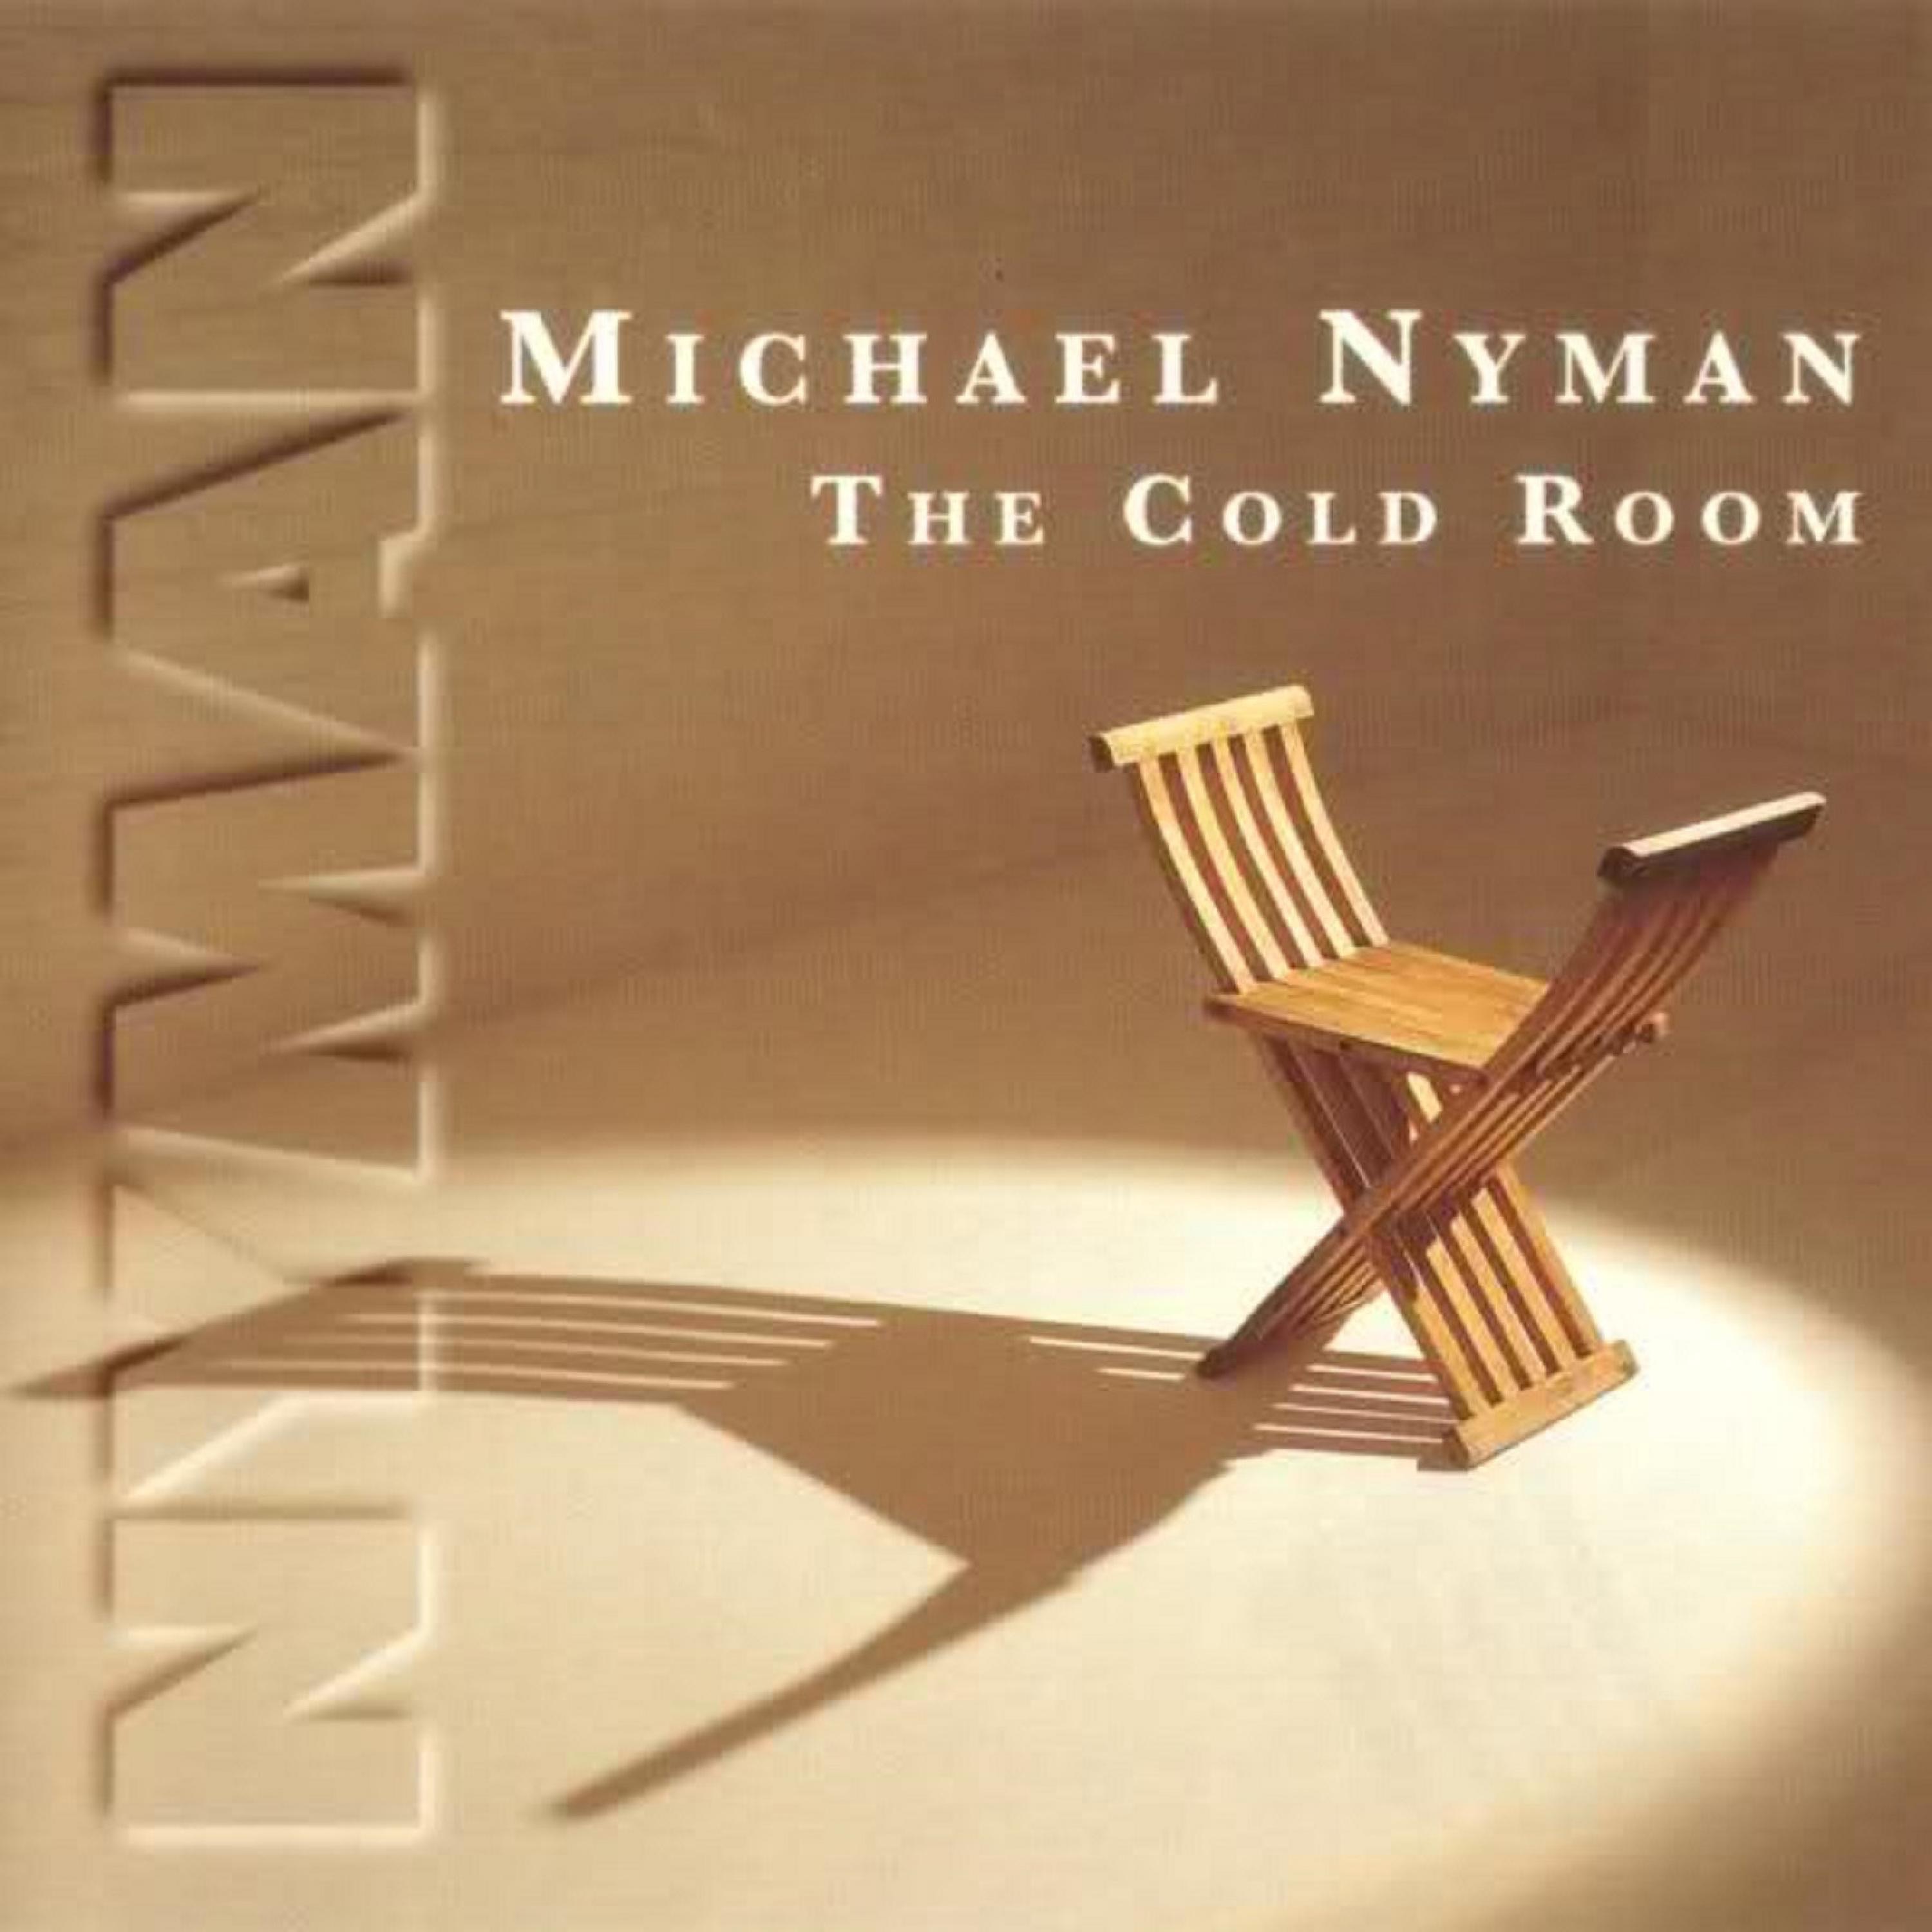 Michael cold. Michael Nyman after Extra time. Michael Nyman the Essential. Michael Nyman - big my Secret.